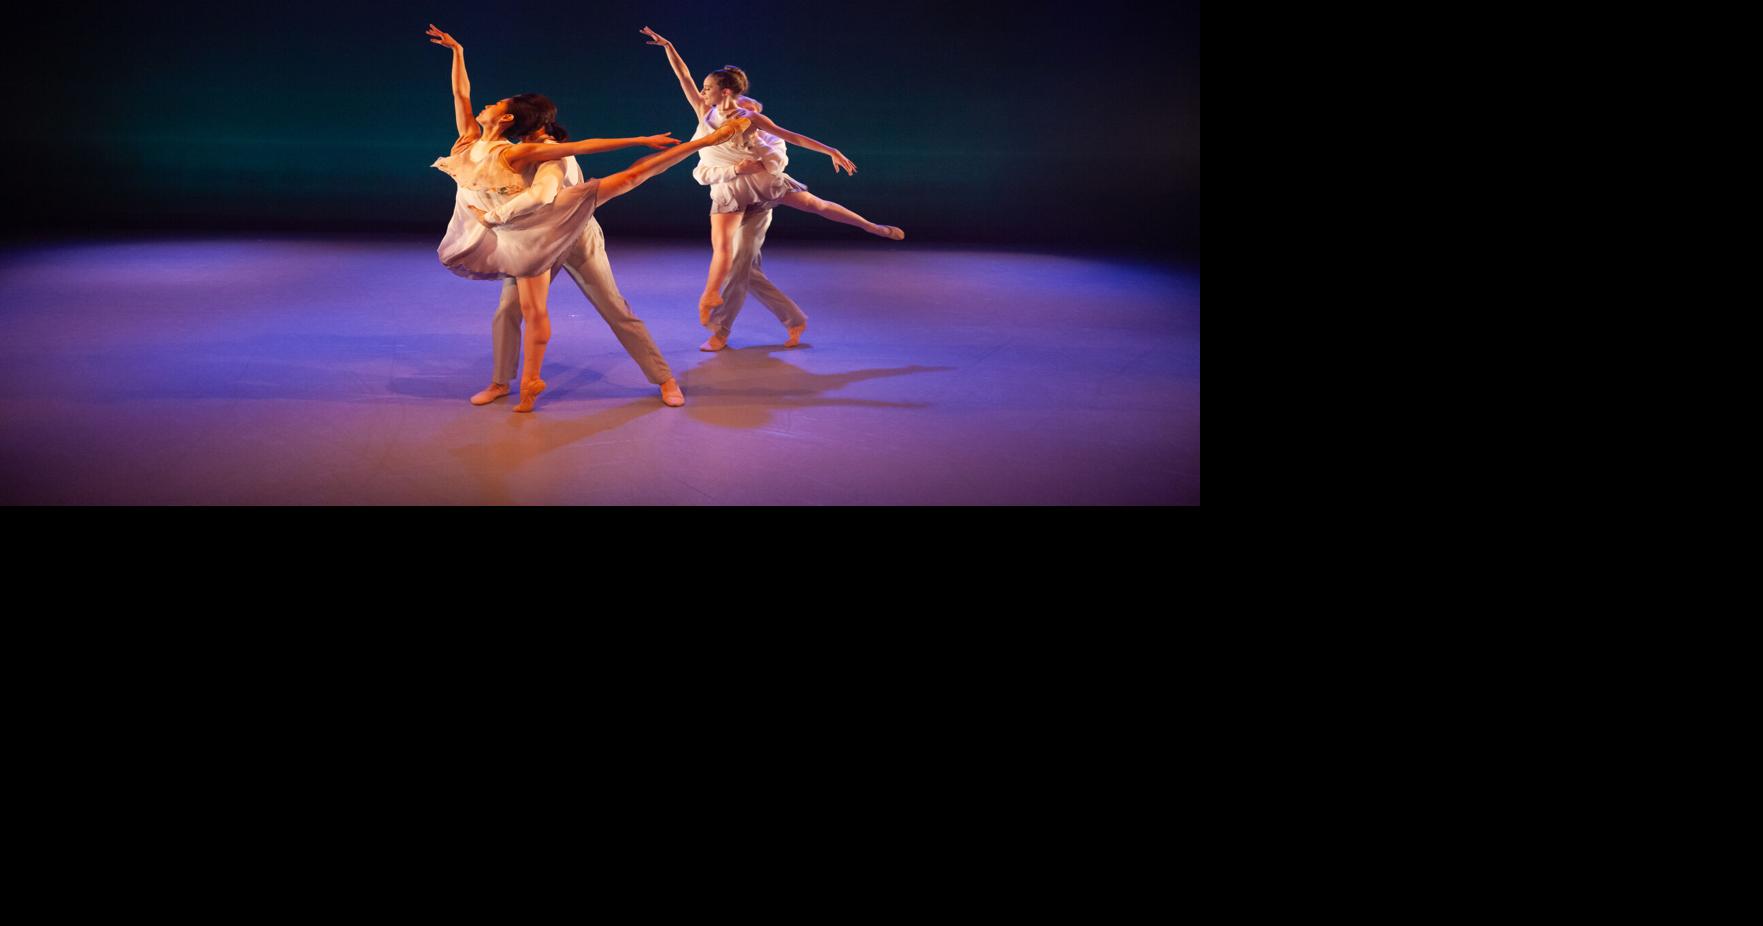 Special Offers to Get Started - Downtown - Ballet Austin